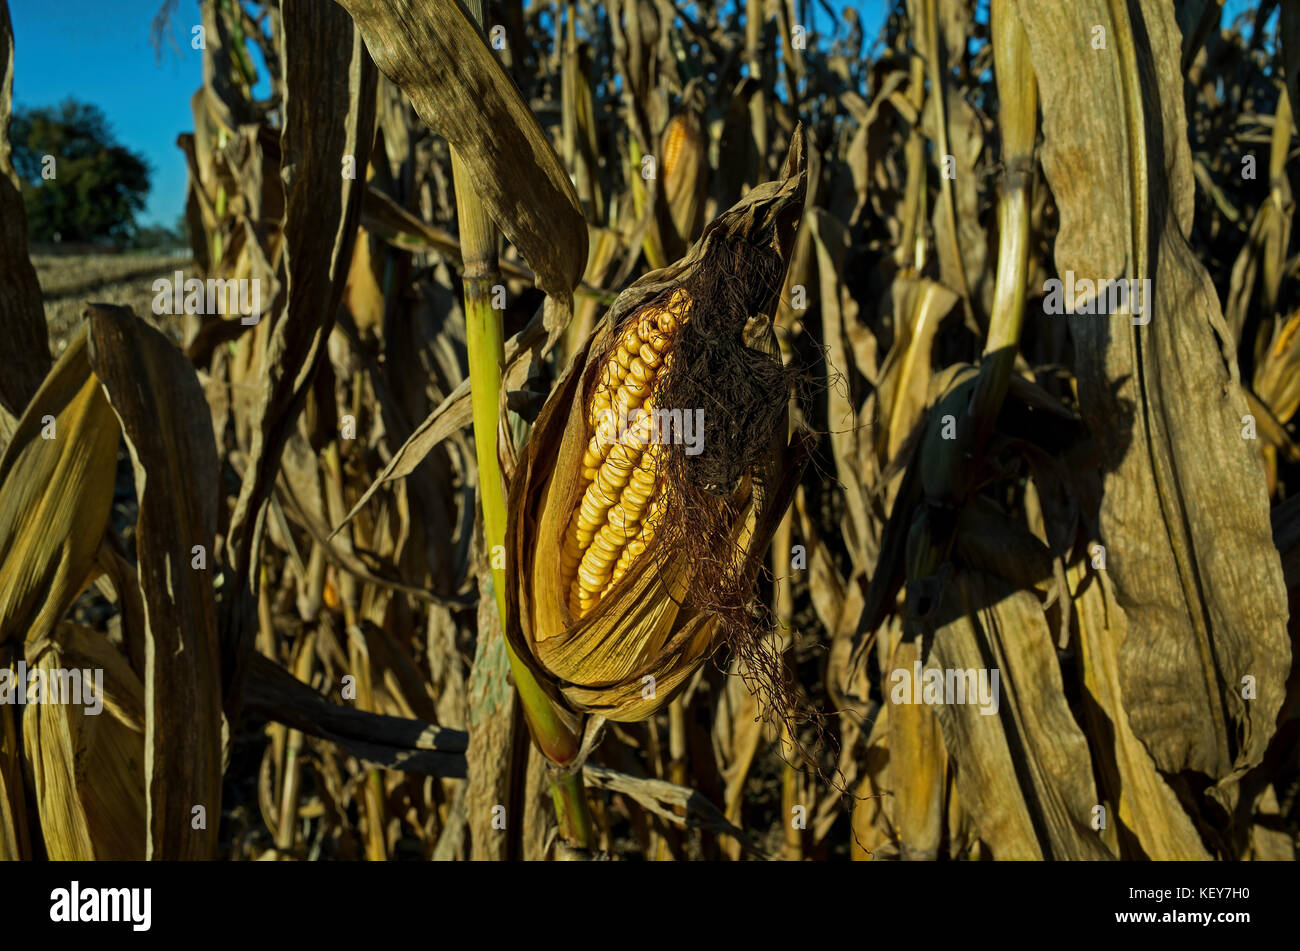 Field corn ready for harvest in the late day golden sun of a bright and sunny October day. Stock Photo